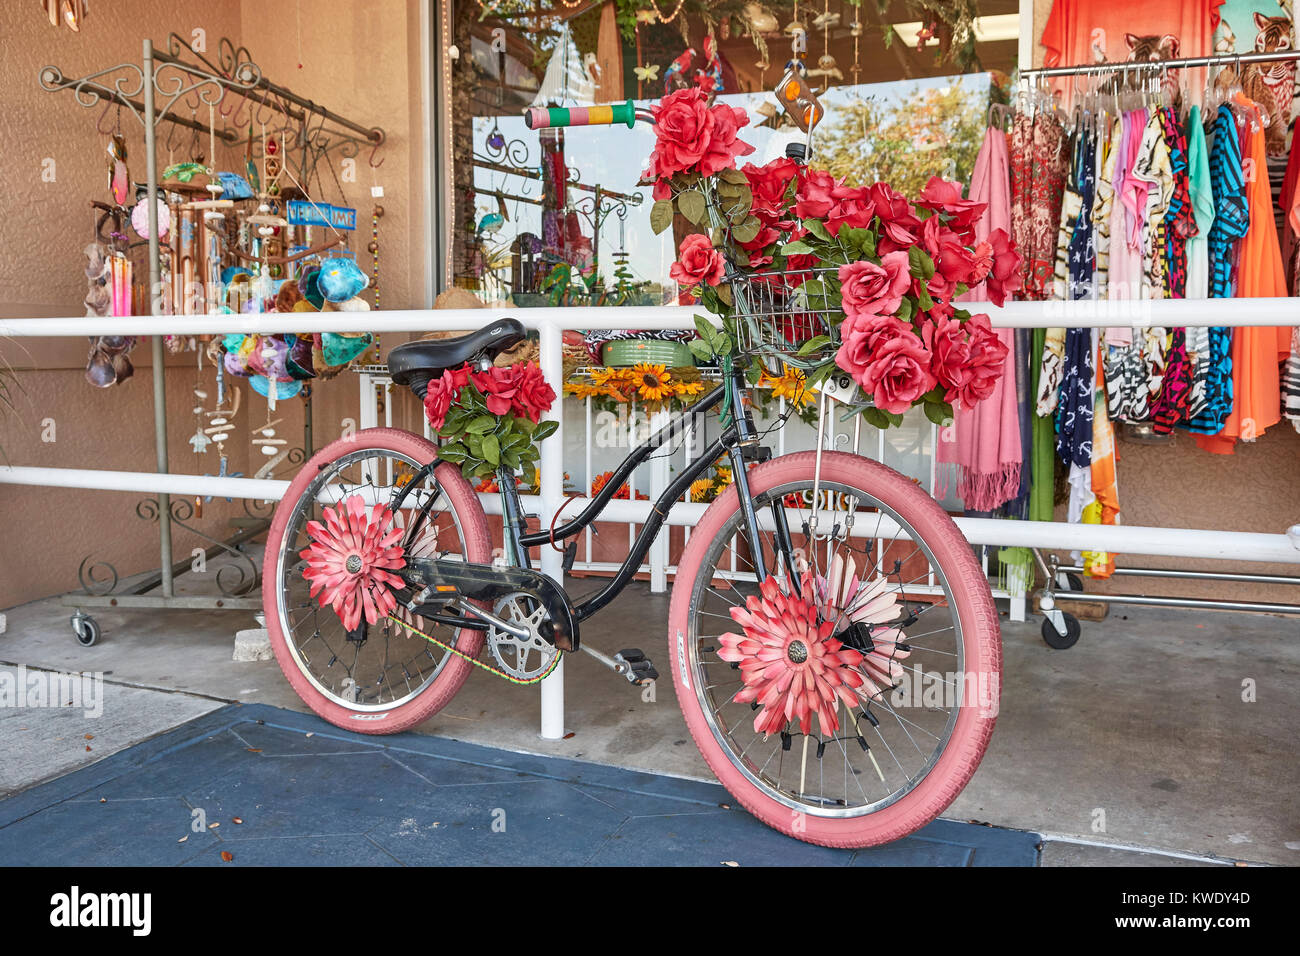 Woman's bicycle painted pink and decorated with red flowers sits in front of a small store, on display in Tarpon Springs Florida, USA. Stock Photo